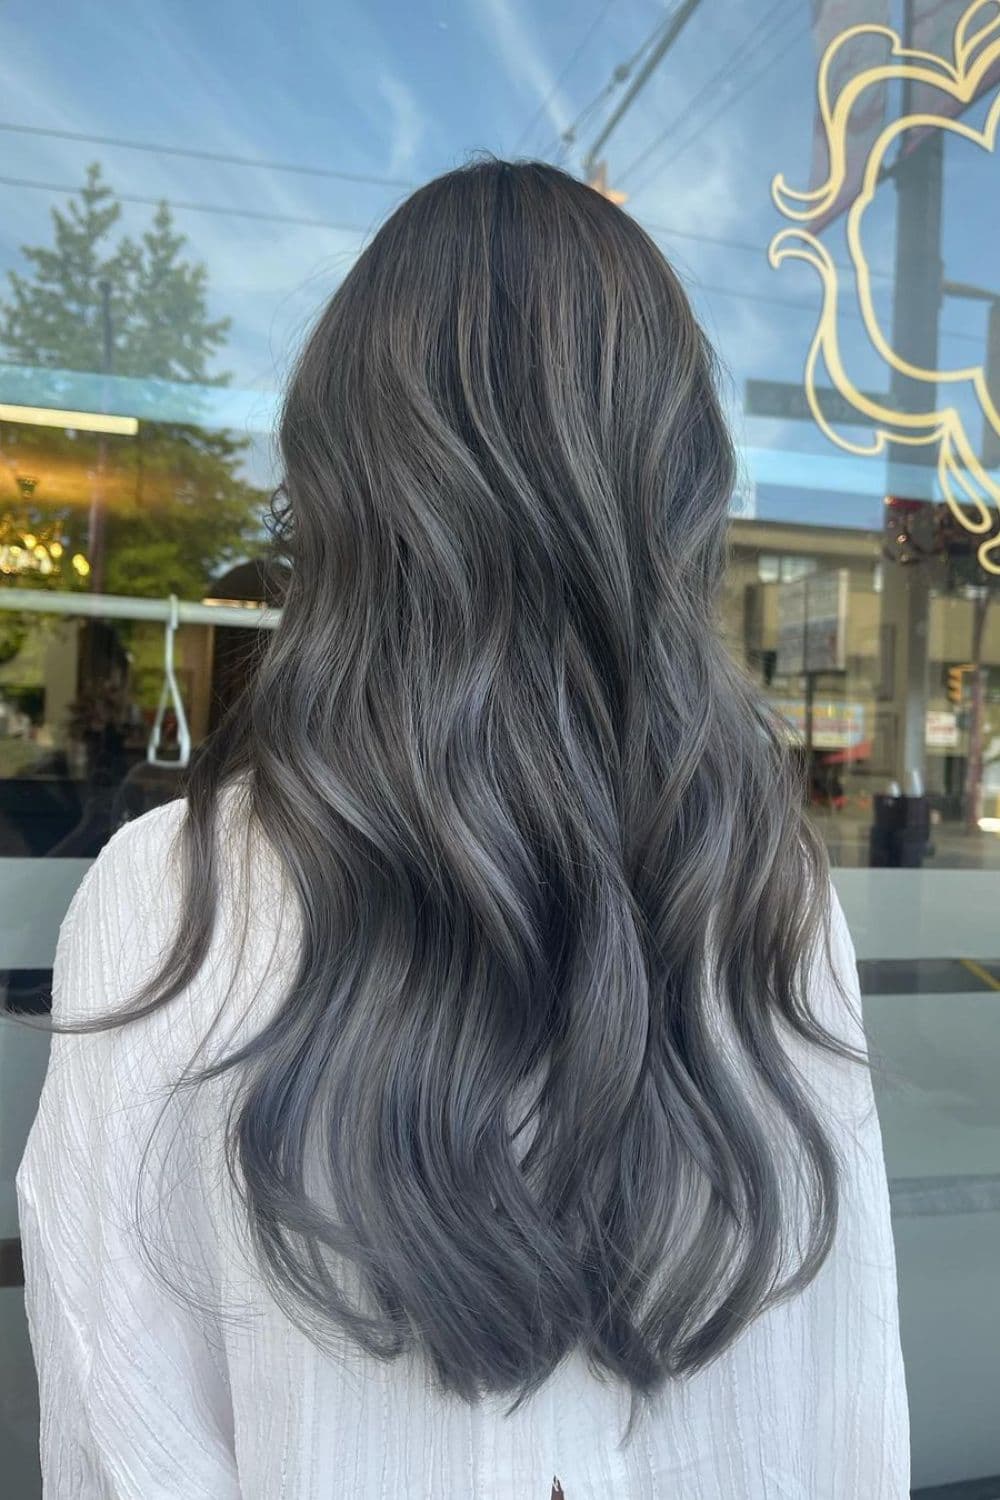 A woman with long balayage ombre hair.